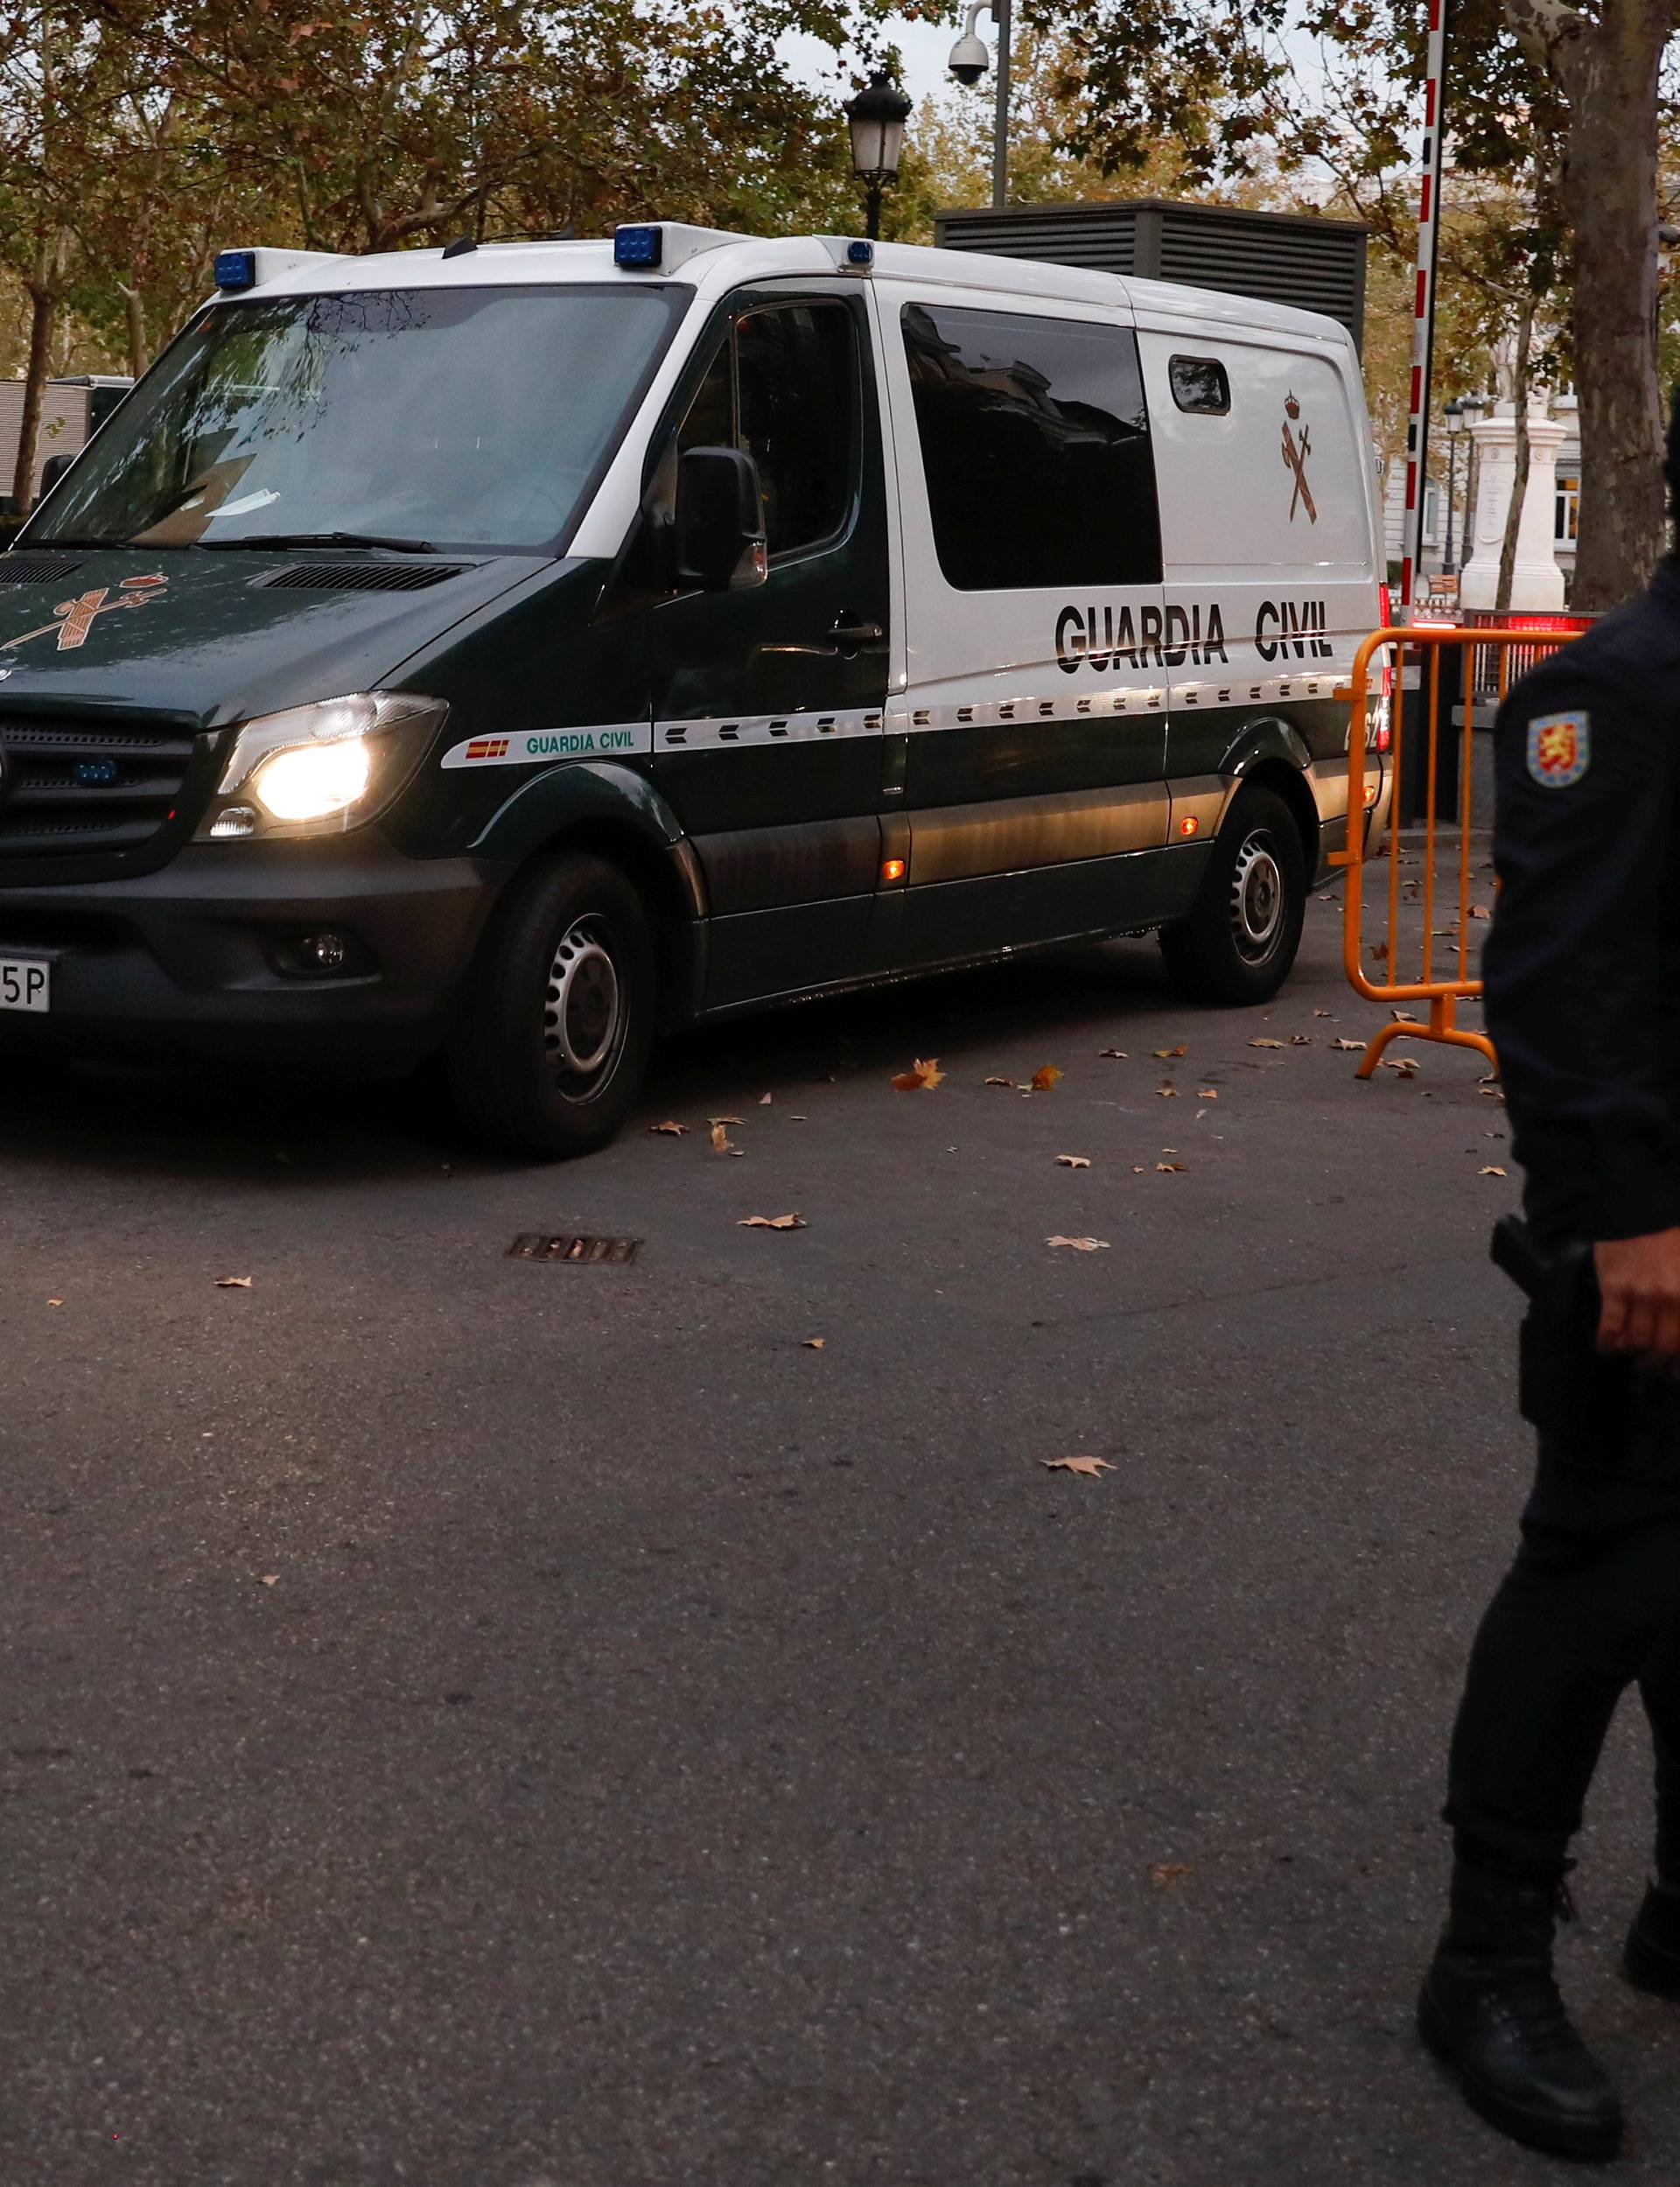 A van carrying members of the dismissed Catalan cabinet leaves a garage of Spain's High Court after they were remanded in custody in Madrid